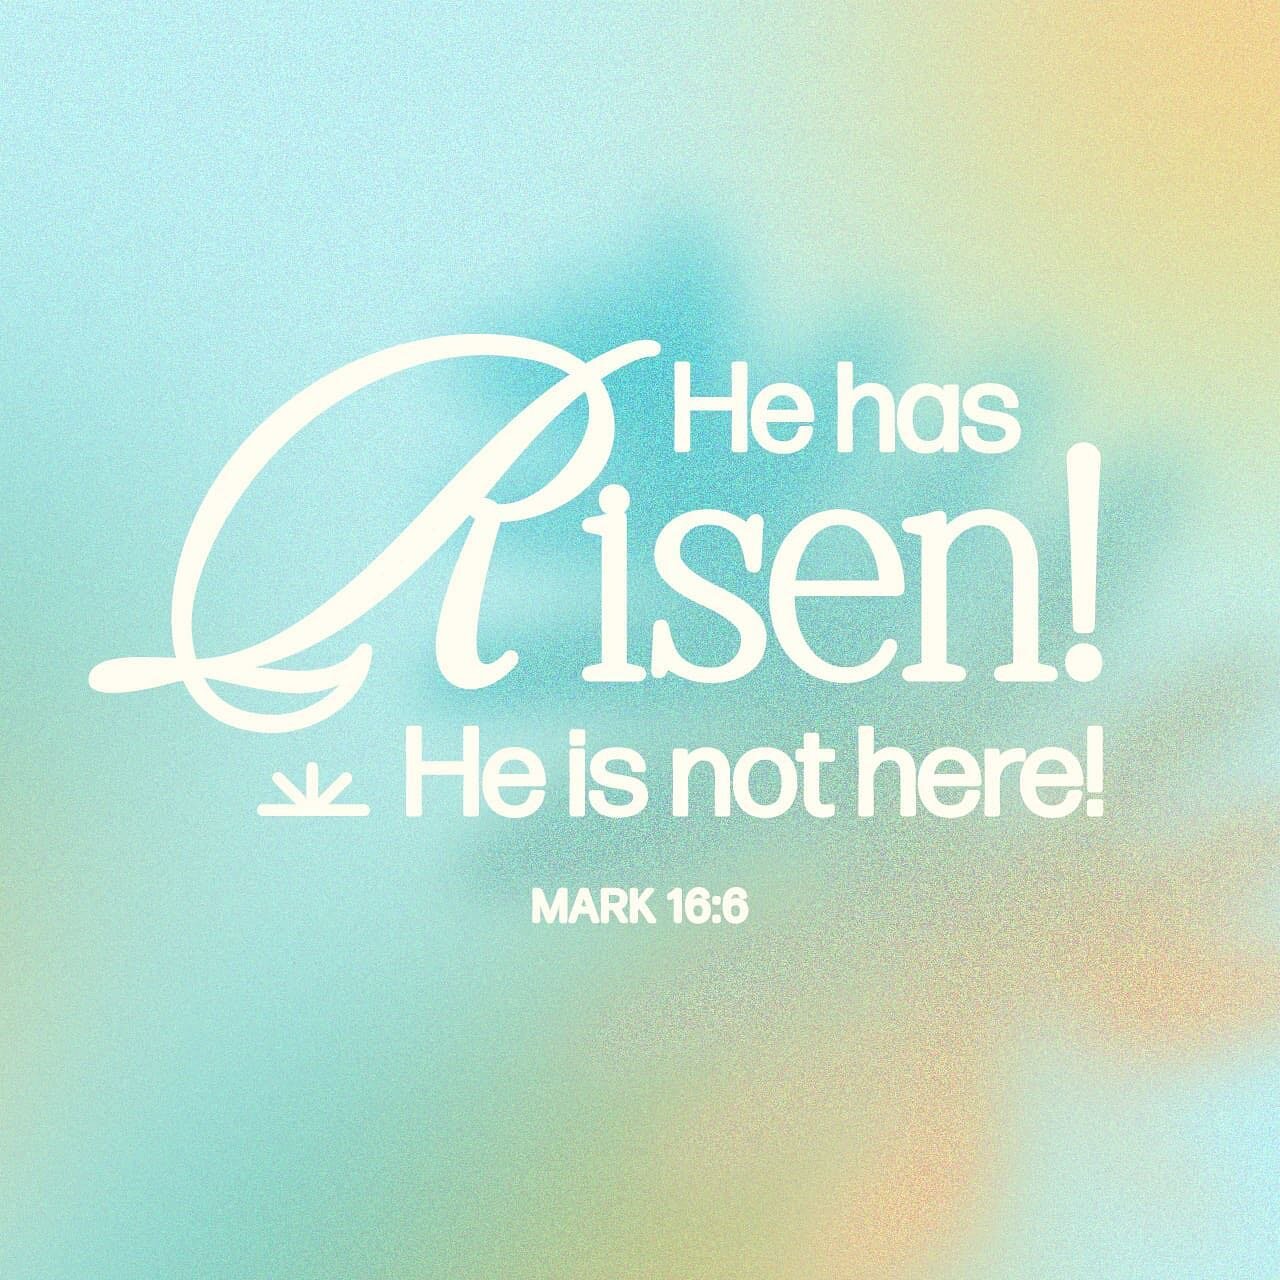 Happy Easter! Today we celebrate our risen Saviour 🙌🥳✝️